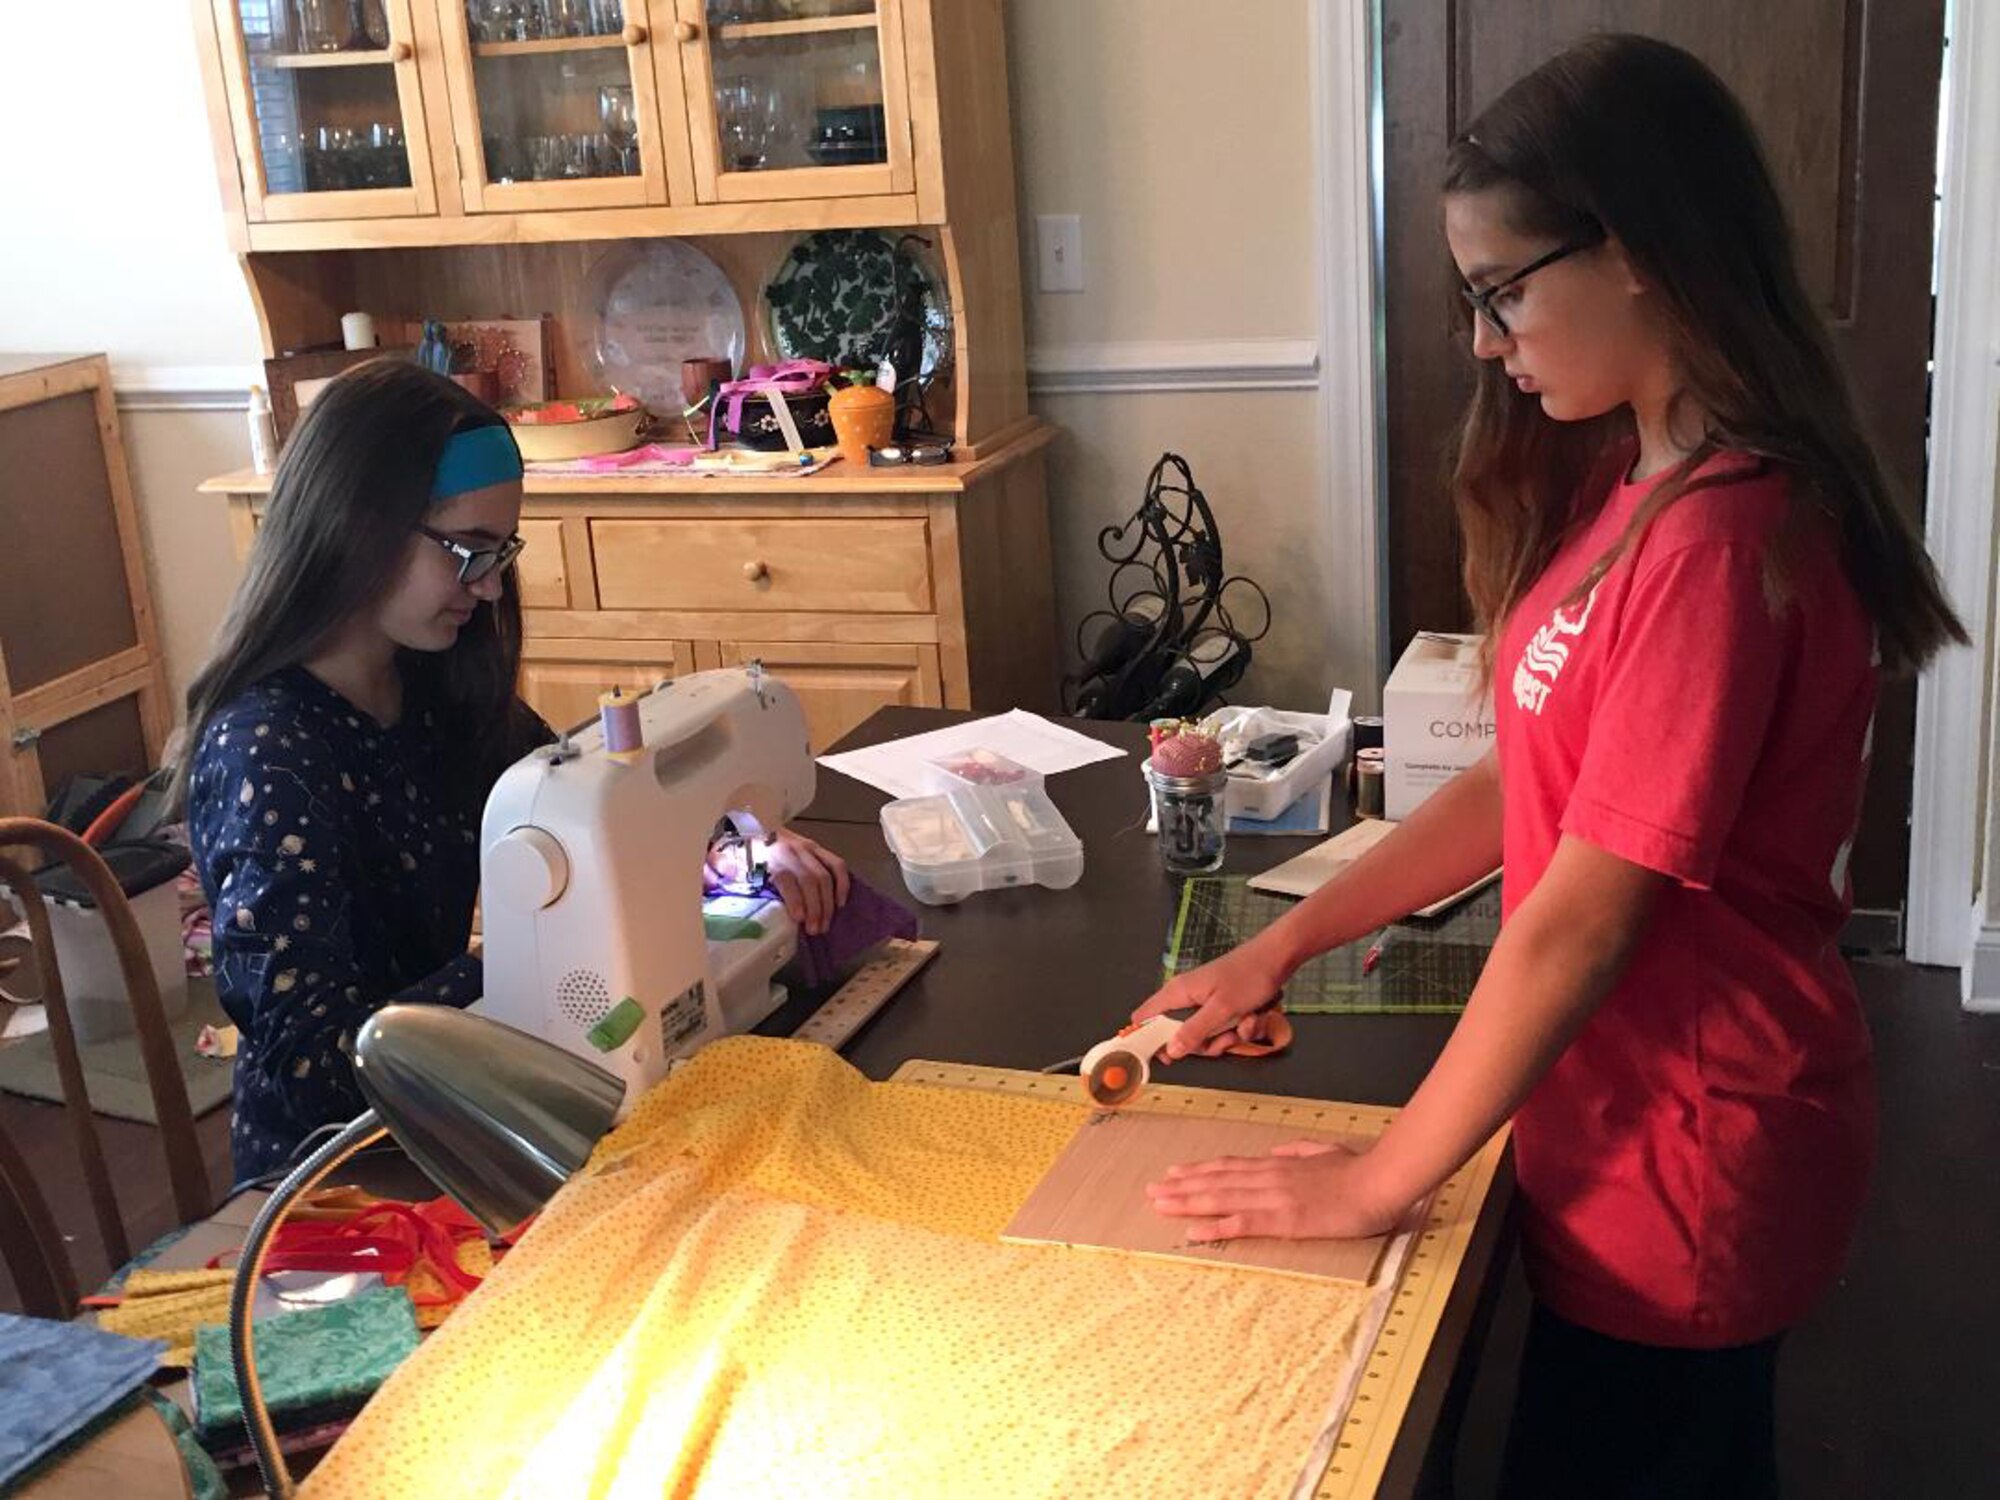 Karina, left, and Kolleen Roessig work together to make reusable cloth face masks. The sisters are making the masks to donate to help combat the spread of the coronavirus. (Courtesy photo)